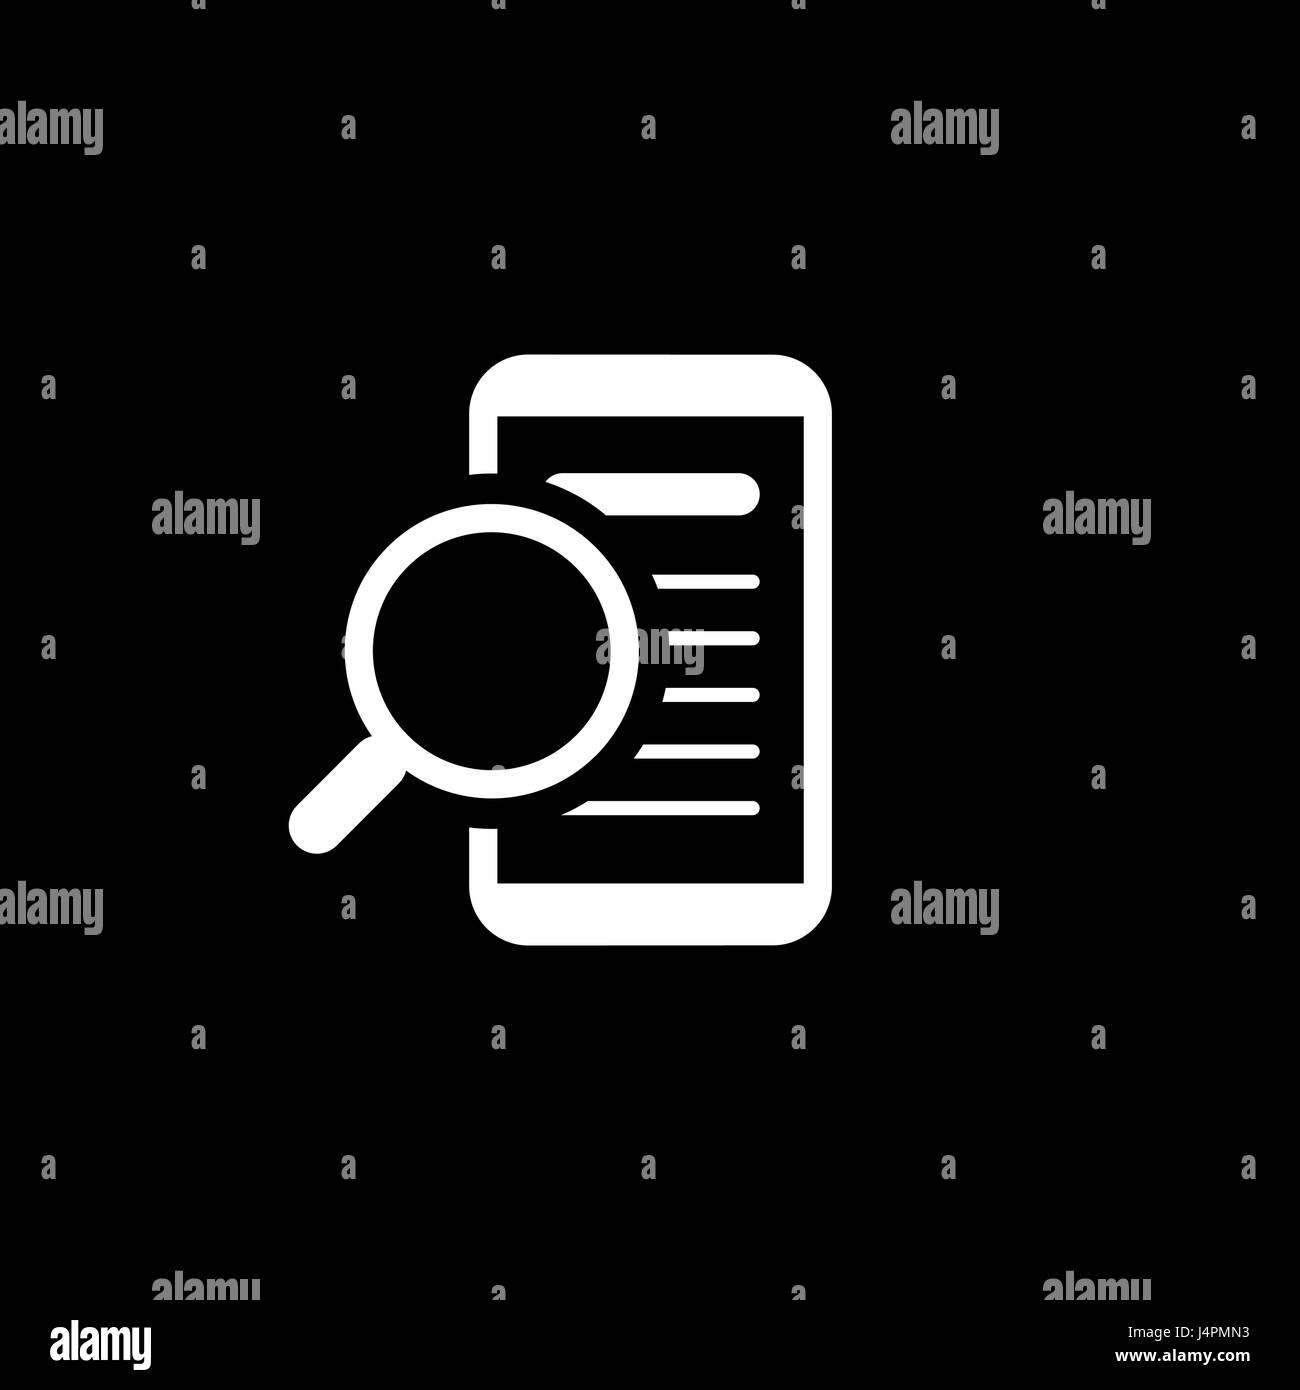 Innovative Search Icon. Business Concept. Flat Design. Stock Vector